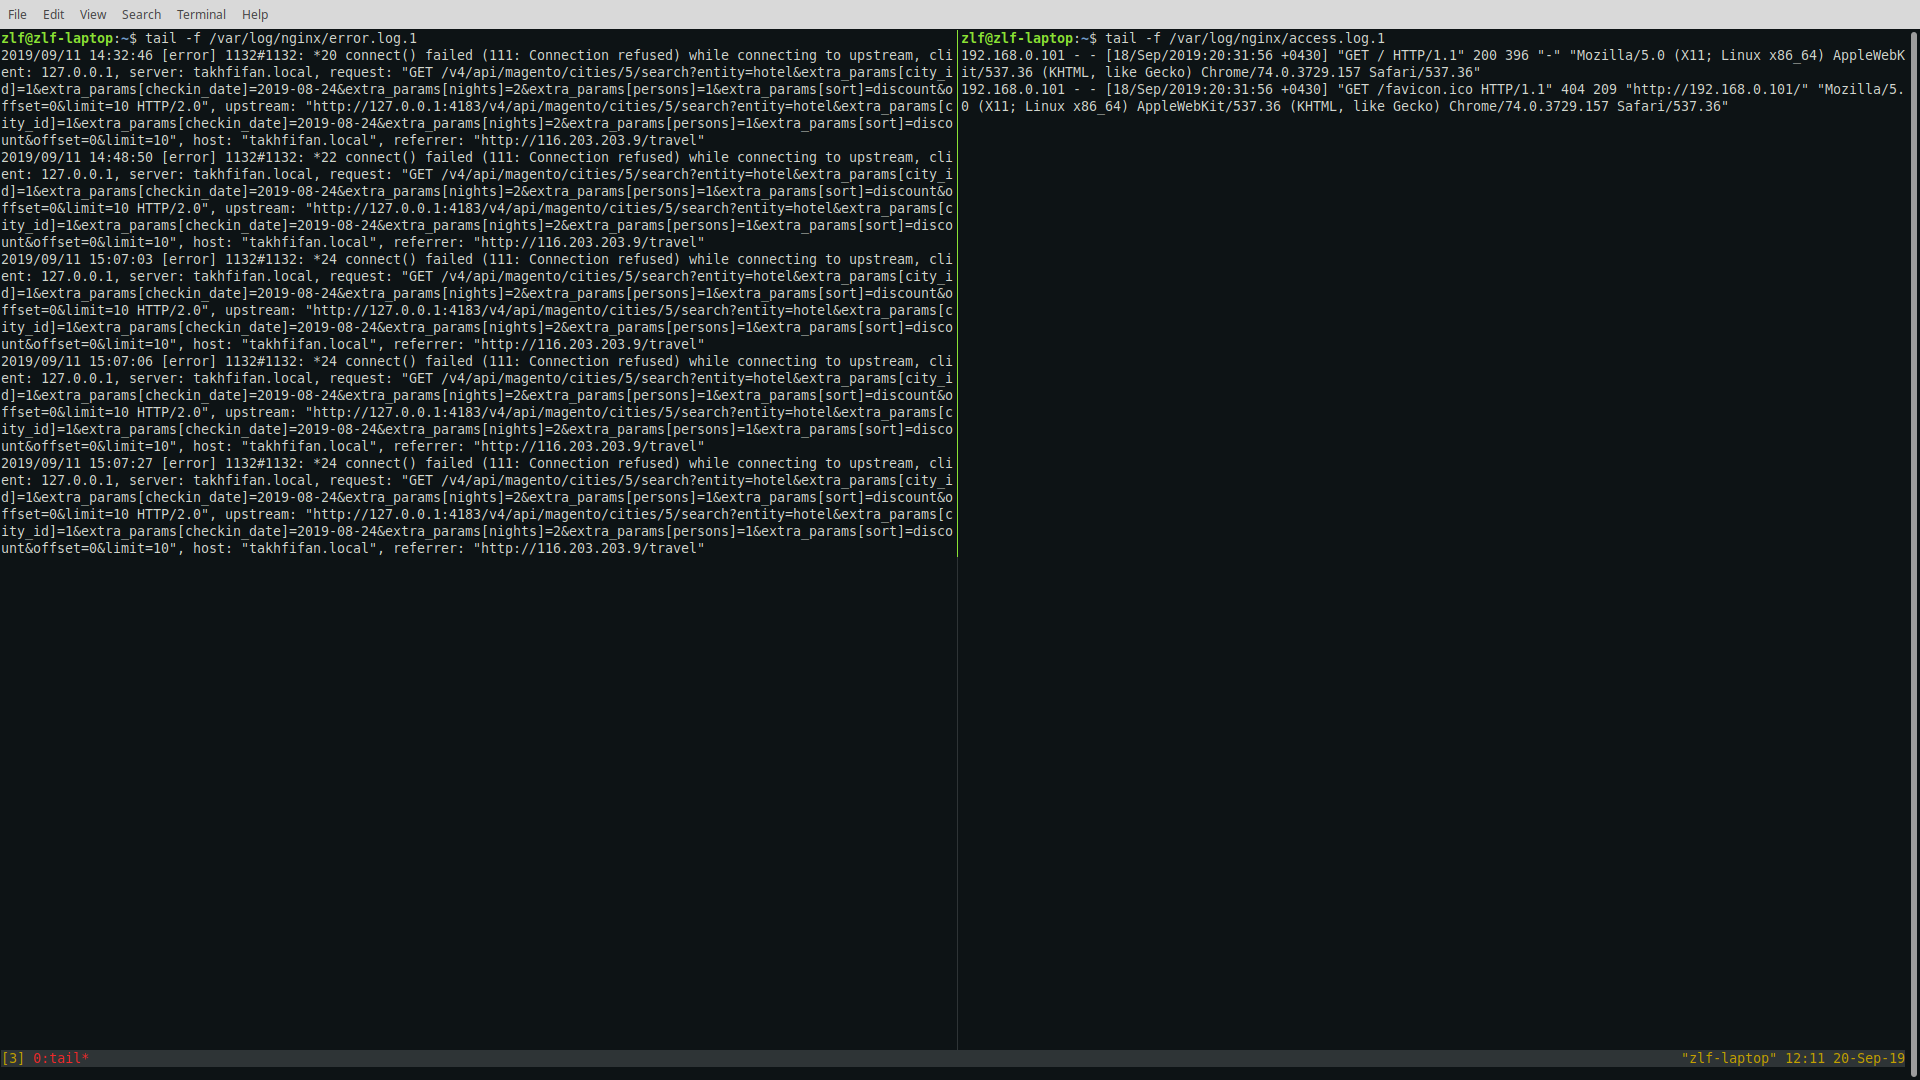 tmux with 2 panes